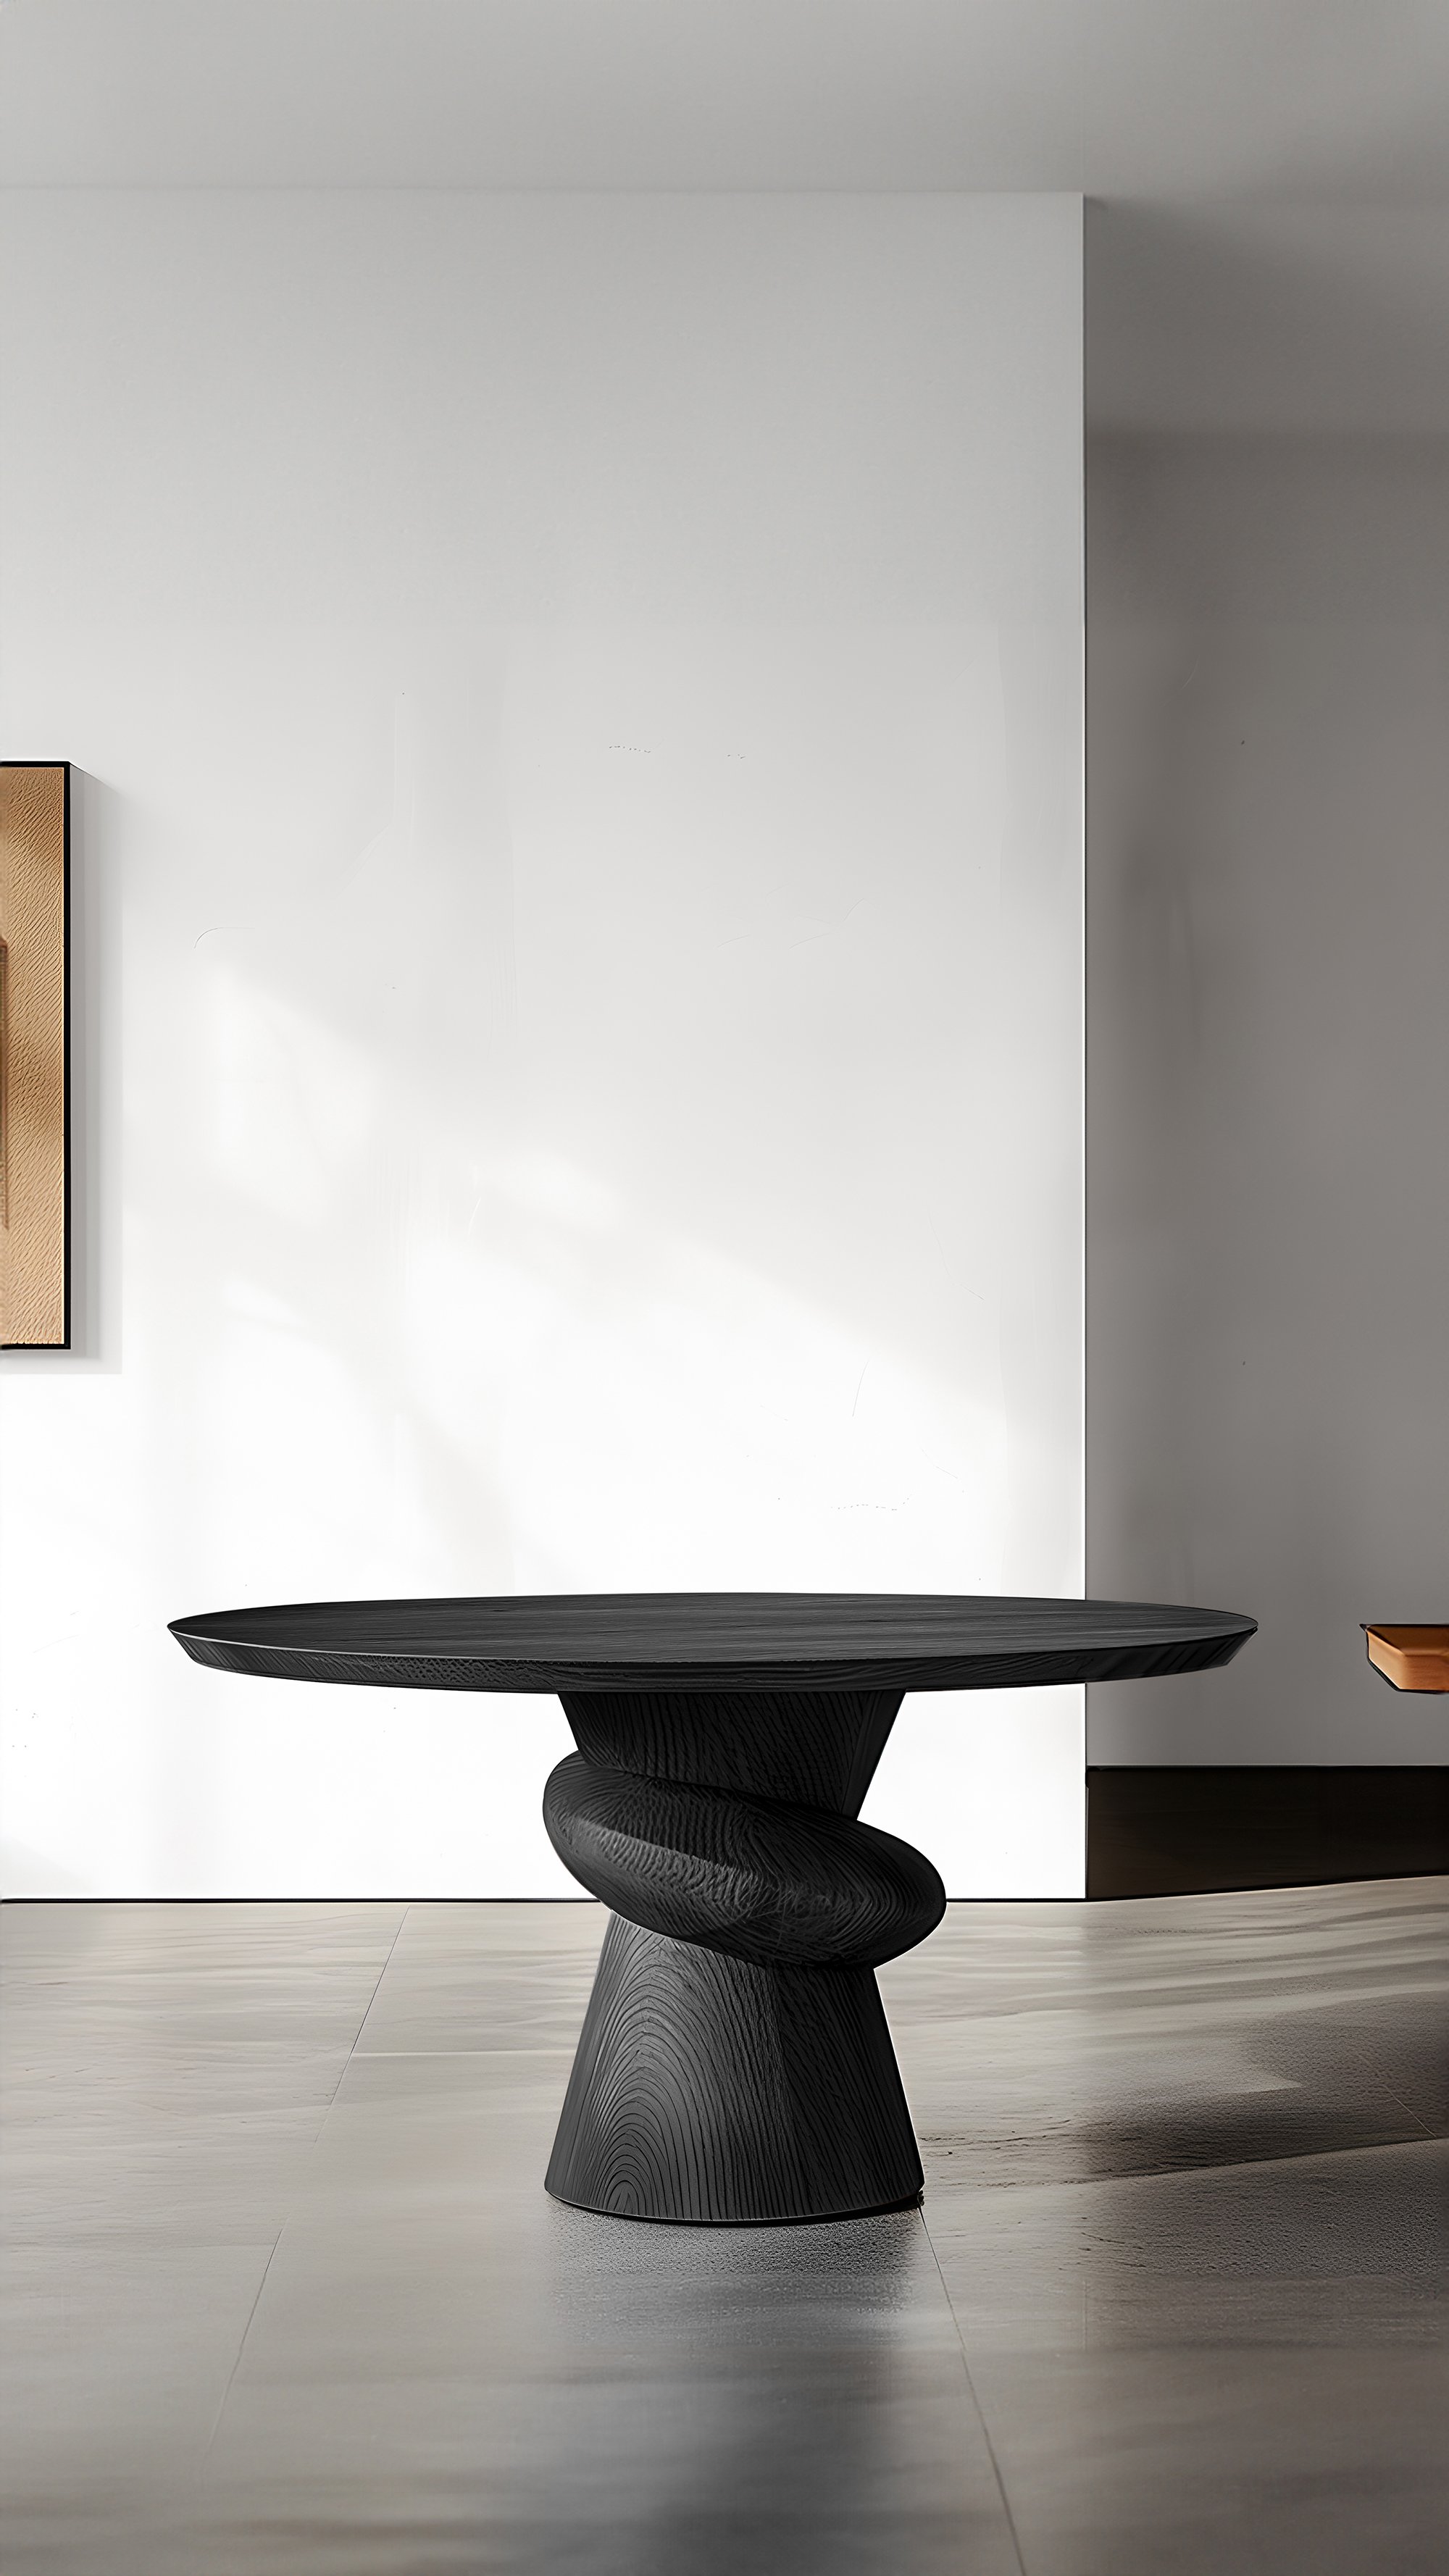 Desks and Writing Tables No09, Socle Series in Black Wood by Joel Escalona - 5.jpg